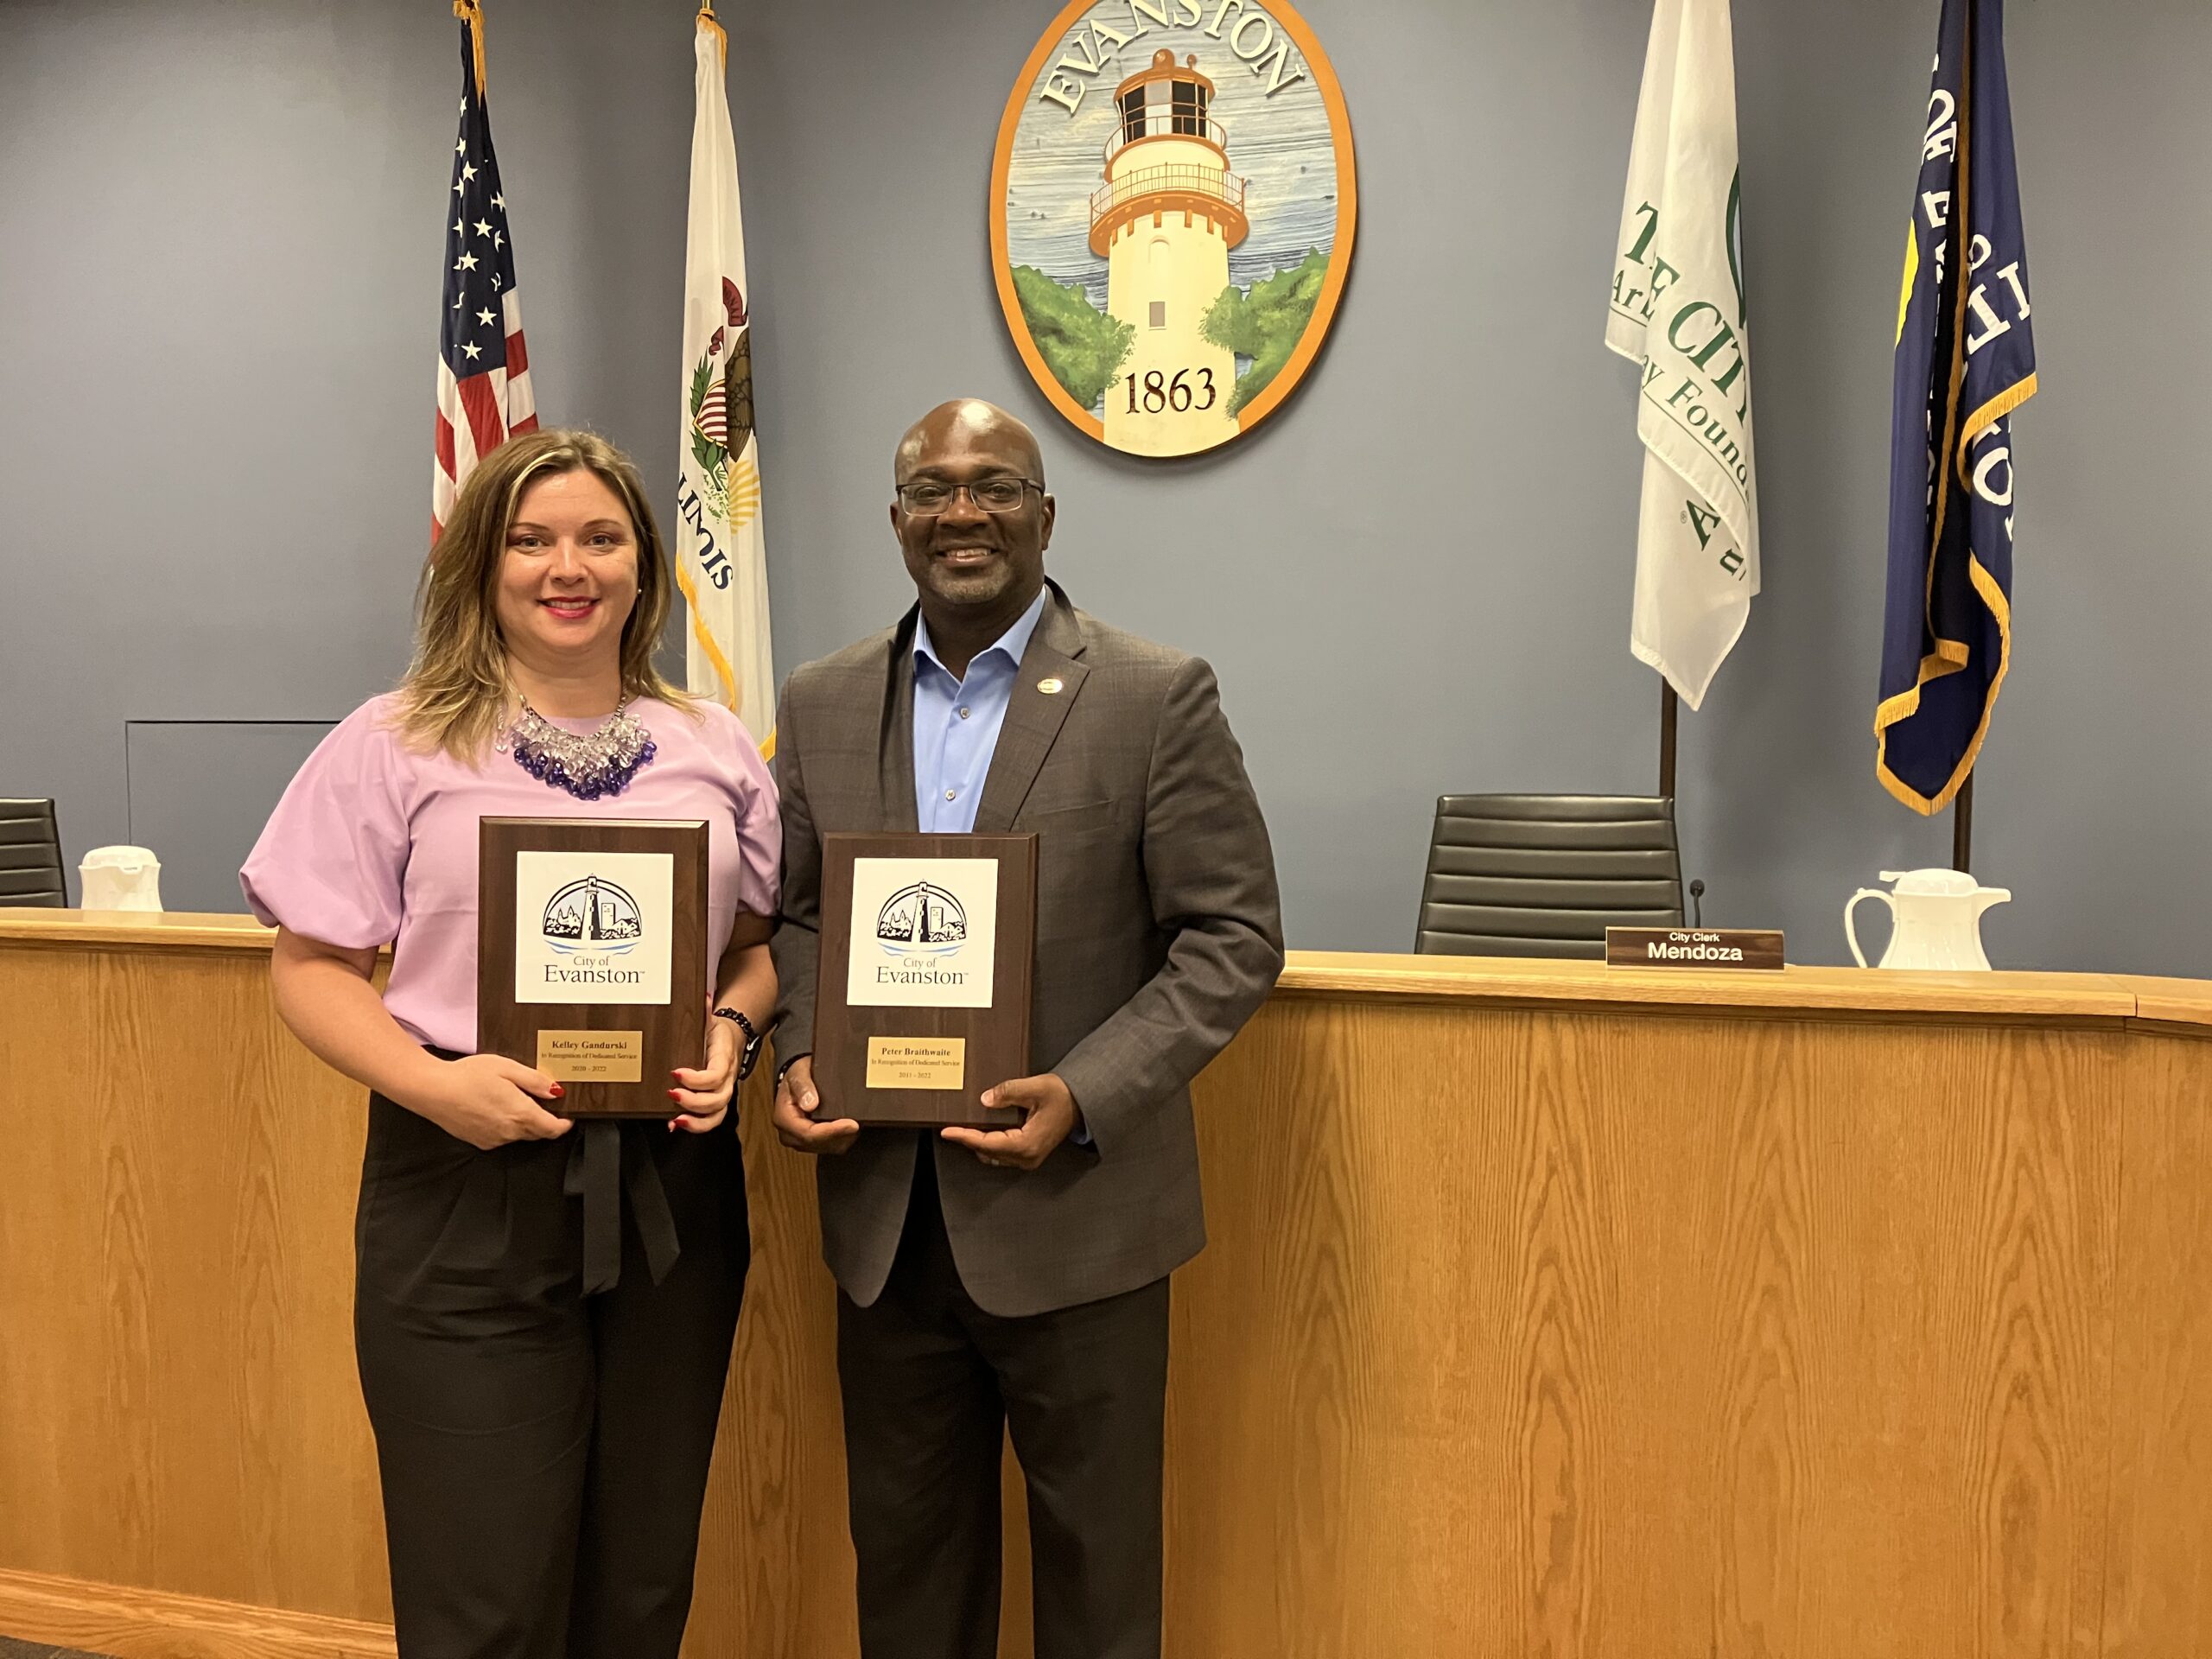 At their final Evanston City Council meeting,  Braithwaite and Gandurski honored for their service to the City